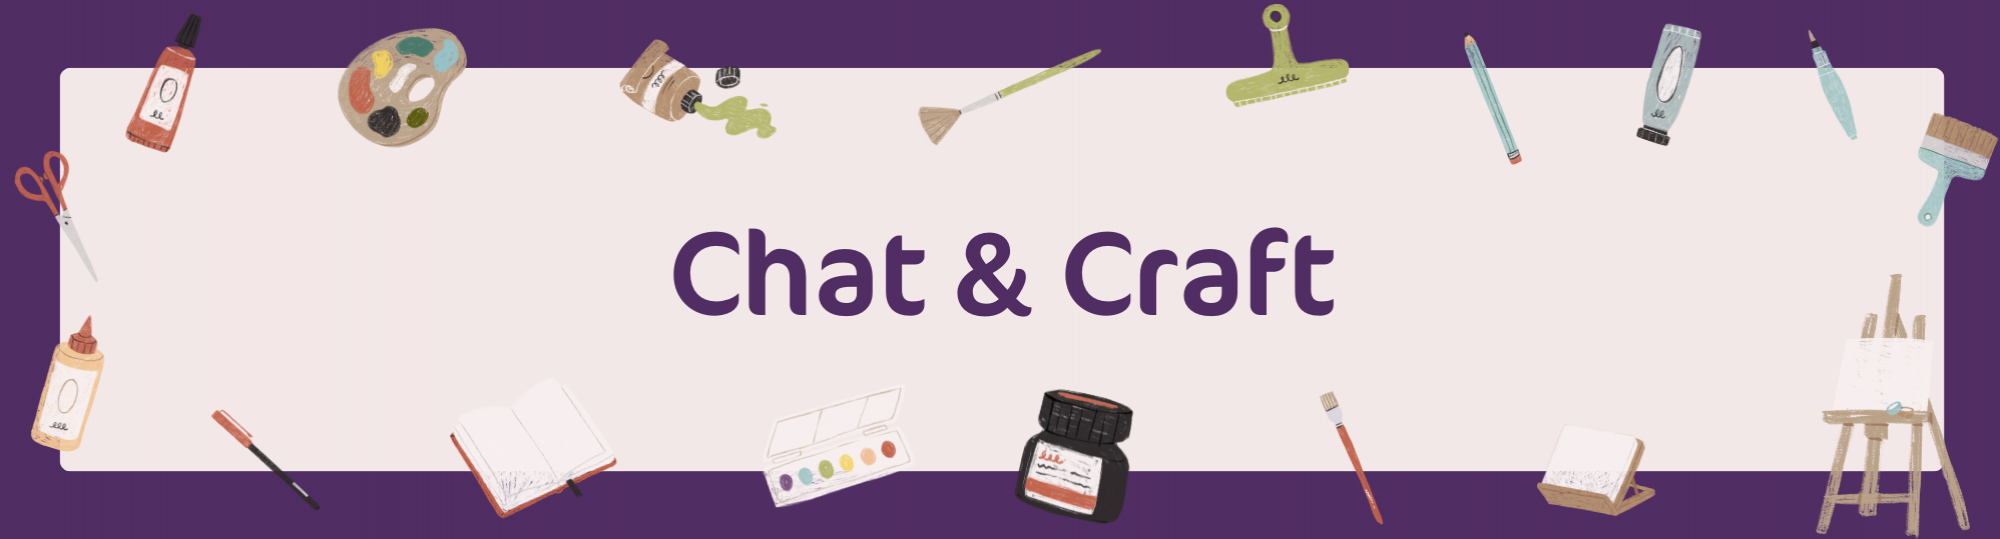 Ageing in Place - Chat & Craft Sessions